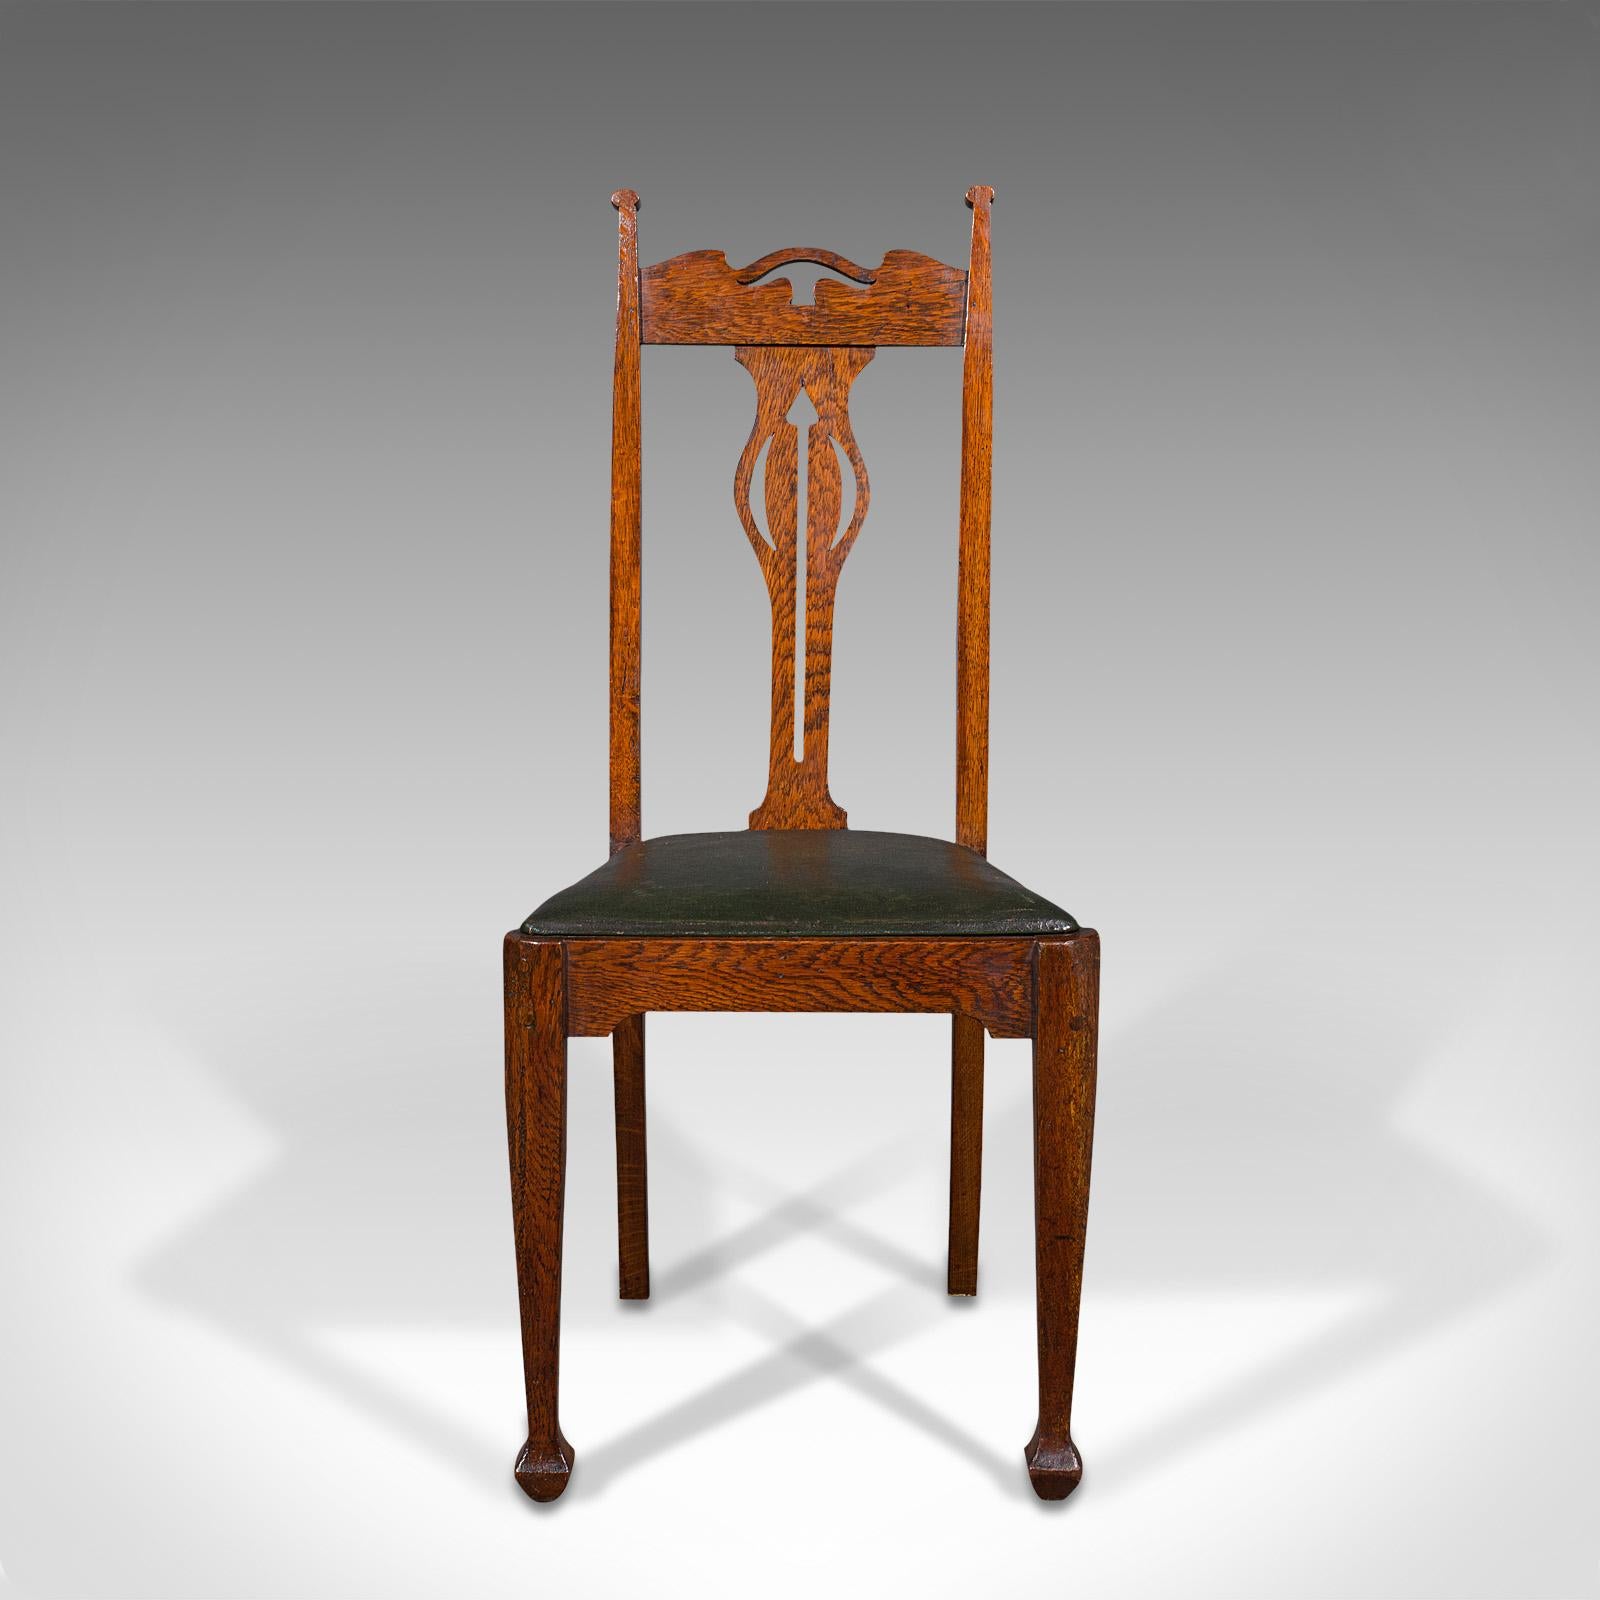 This is a set of 6 antique dining chairs. An English, oak seat in the manner of Liberty, dating to the late Victorian period, circa 1900.

Dashing colour, figuring and finish sets apart this dining suite
Displaying a desirable aged patina